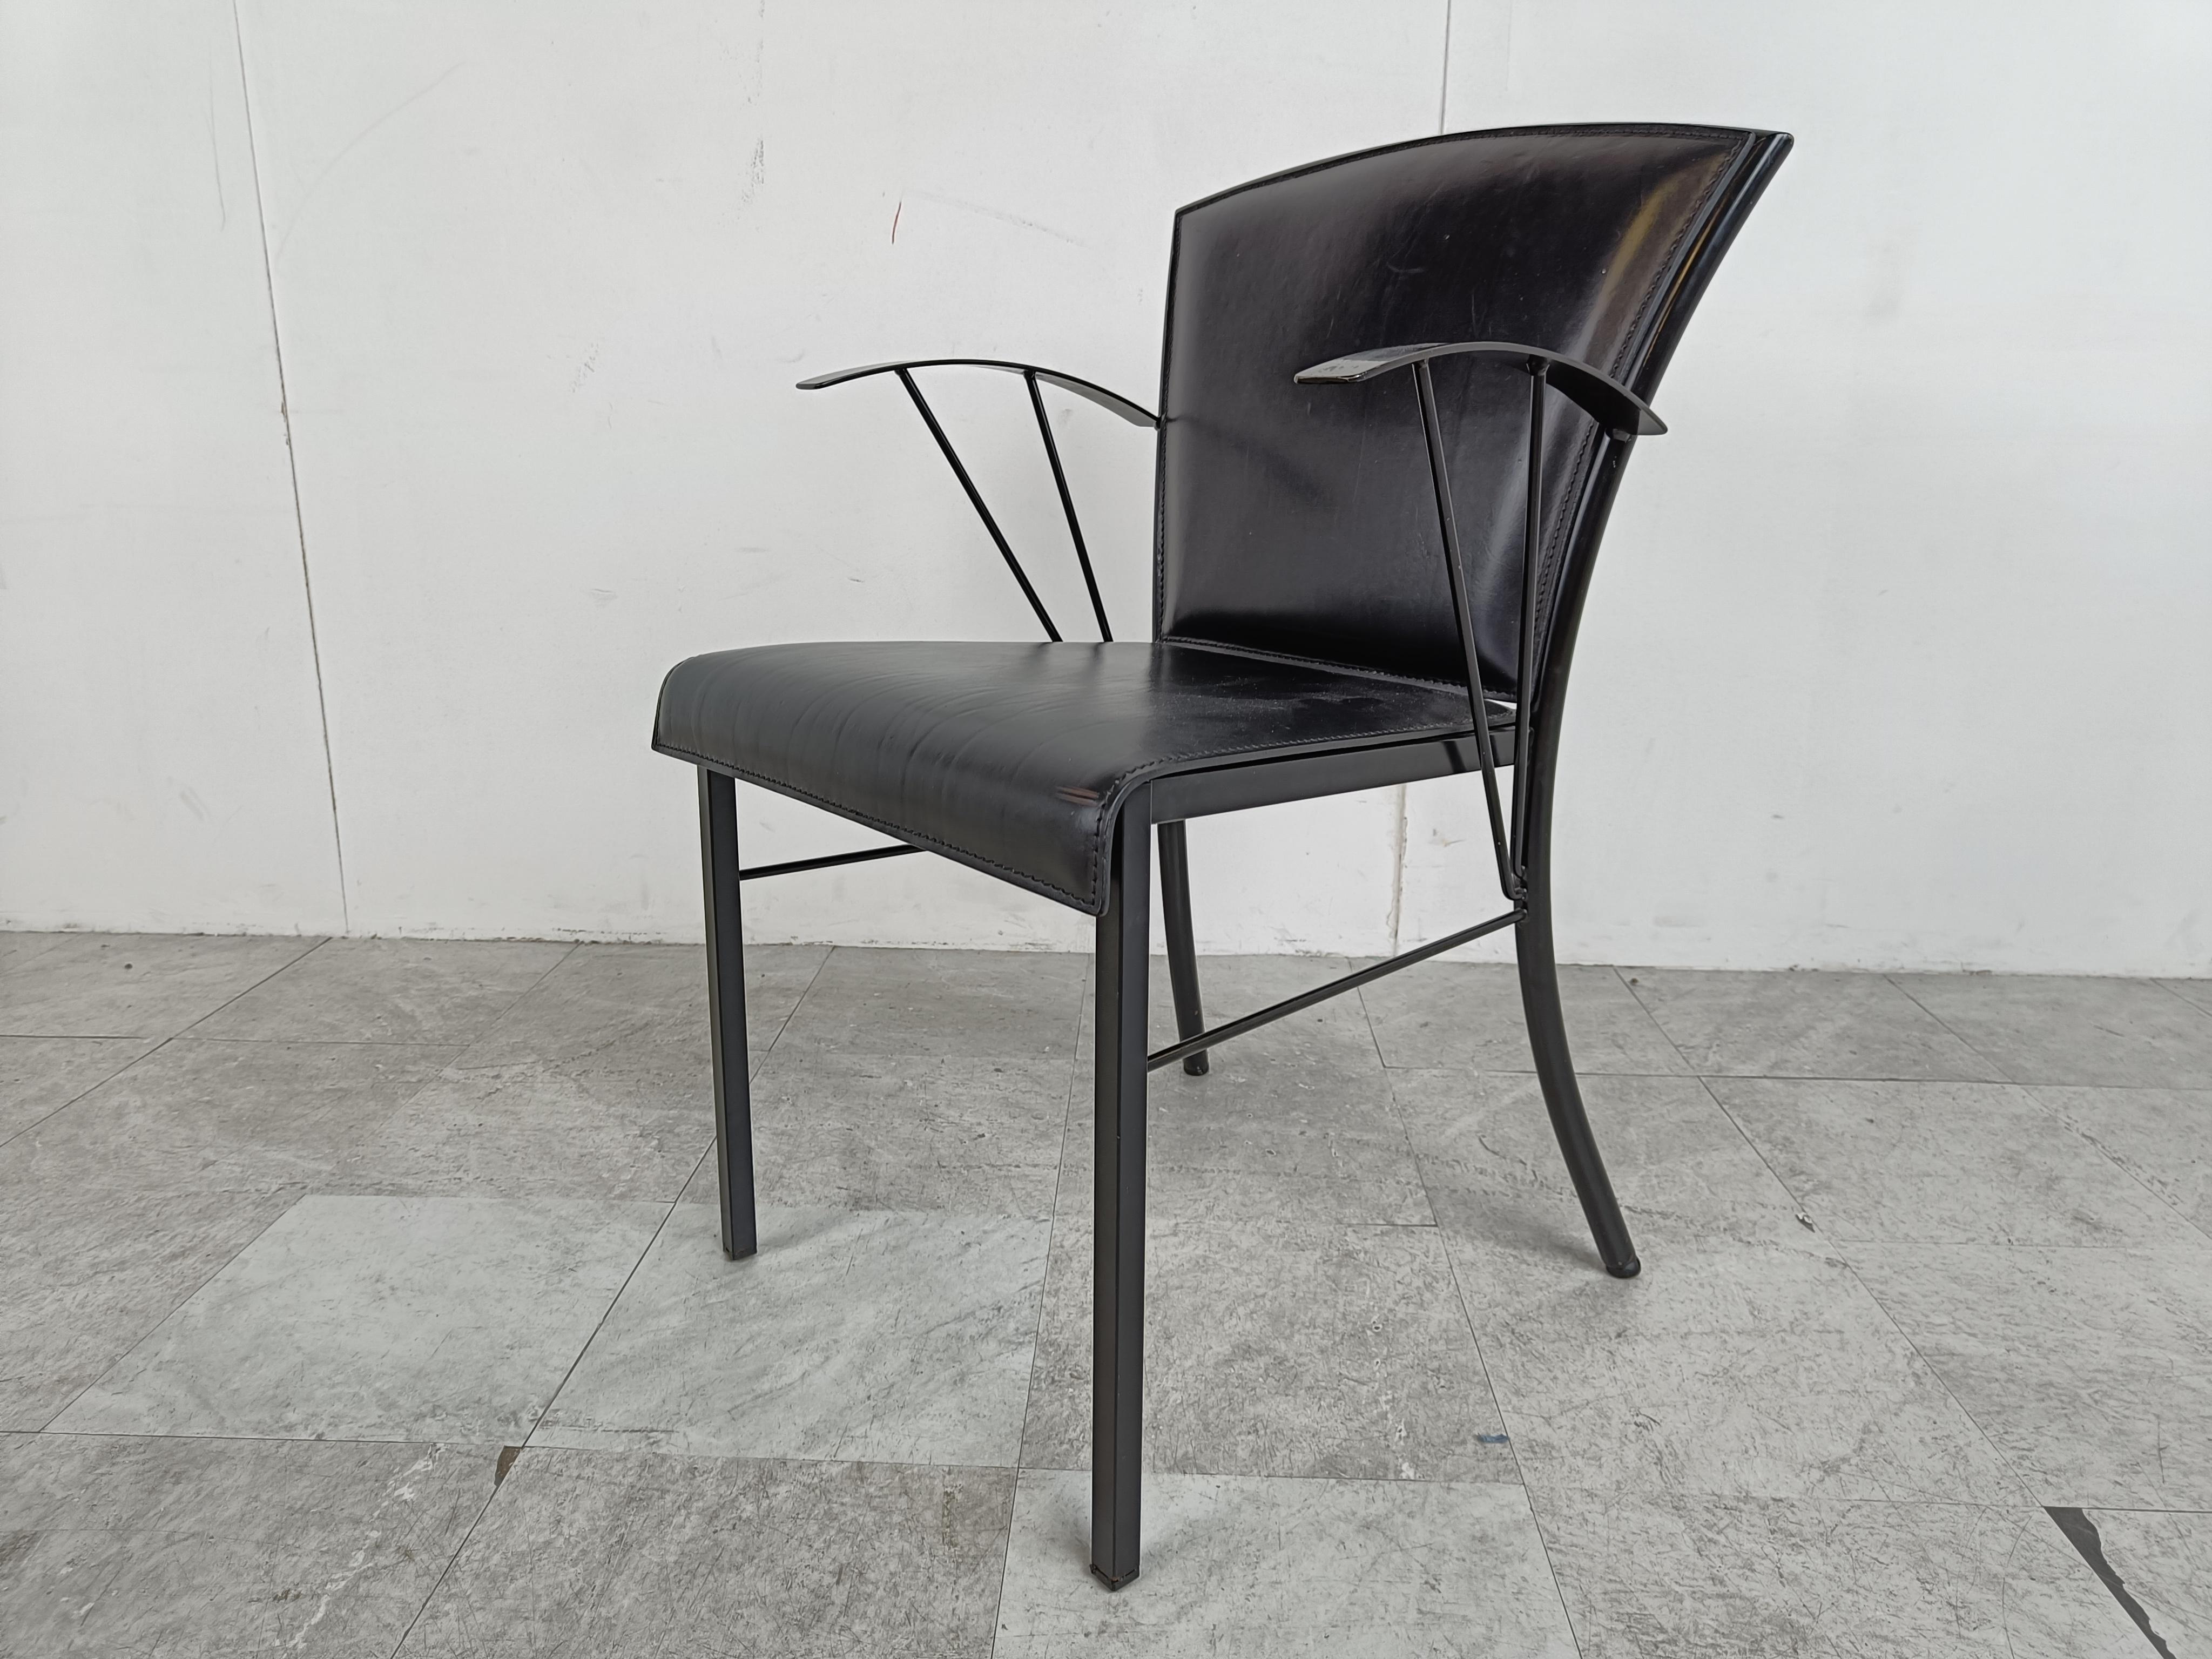 Vintage Black Leather Dining Chairs by Arrben, 1980s For Sale 4